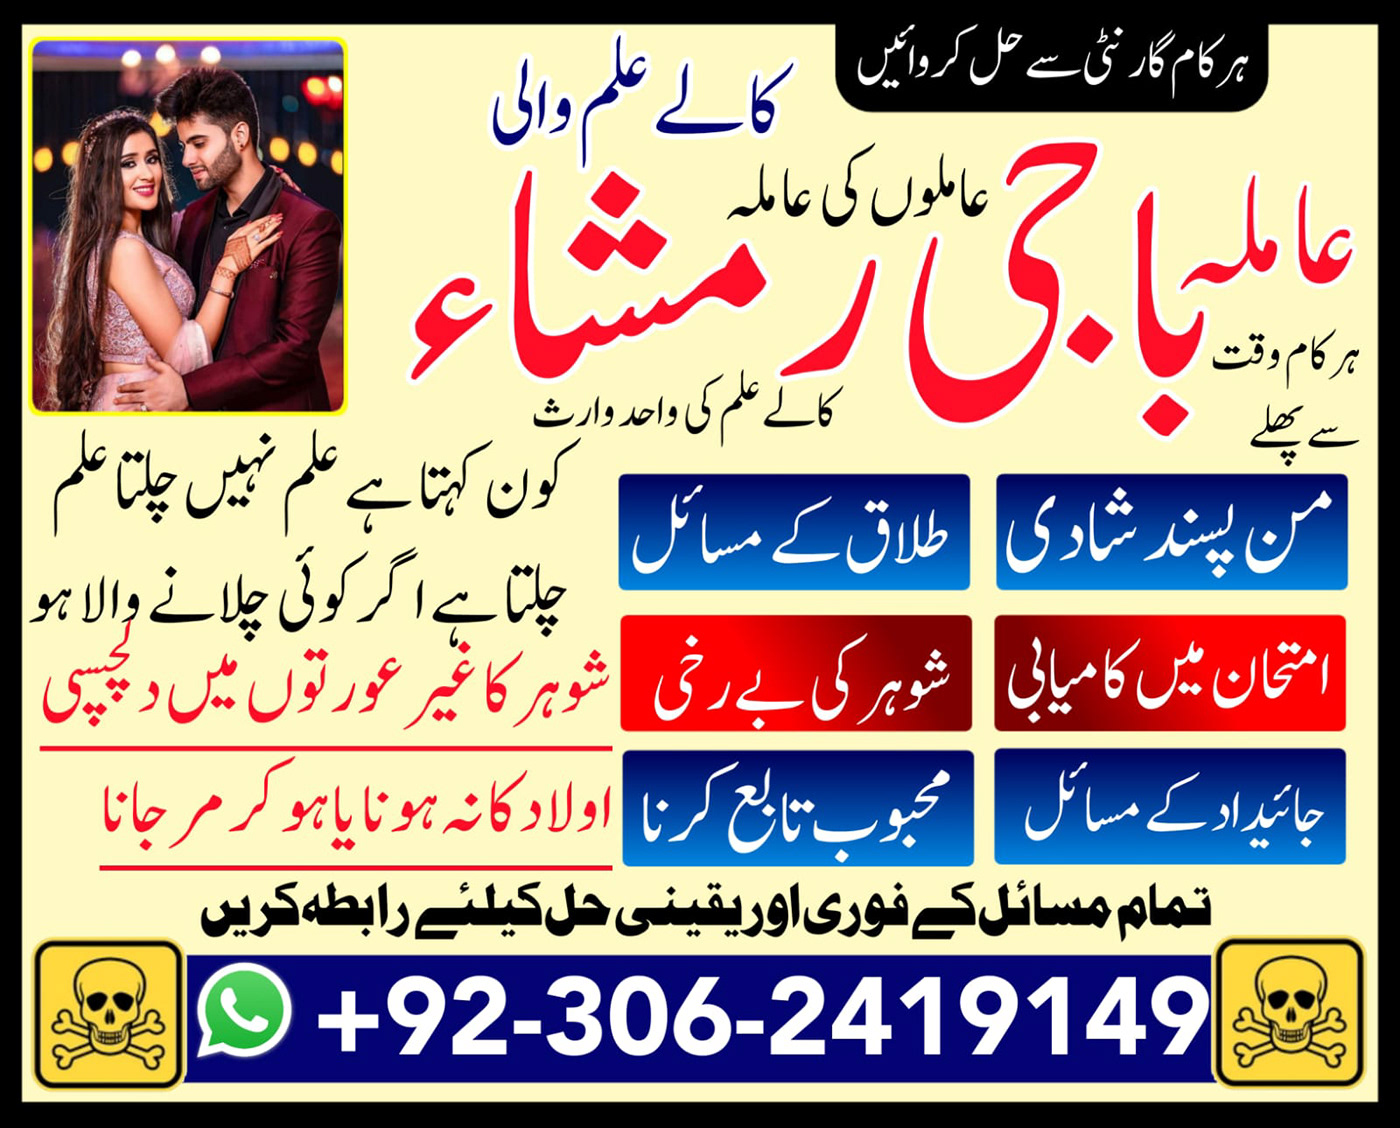 amilbaba Amil Baba in Pakistan Amil Baba in USA love marriage problem solution astrologer Top 10 Amil Baba